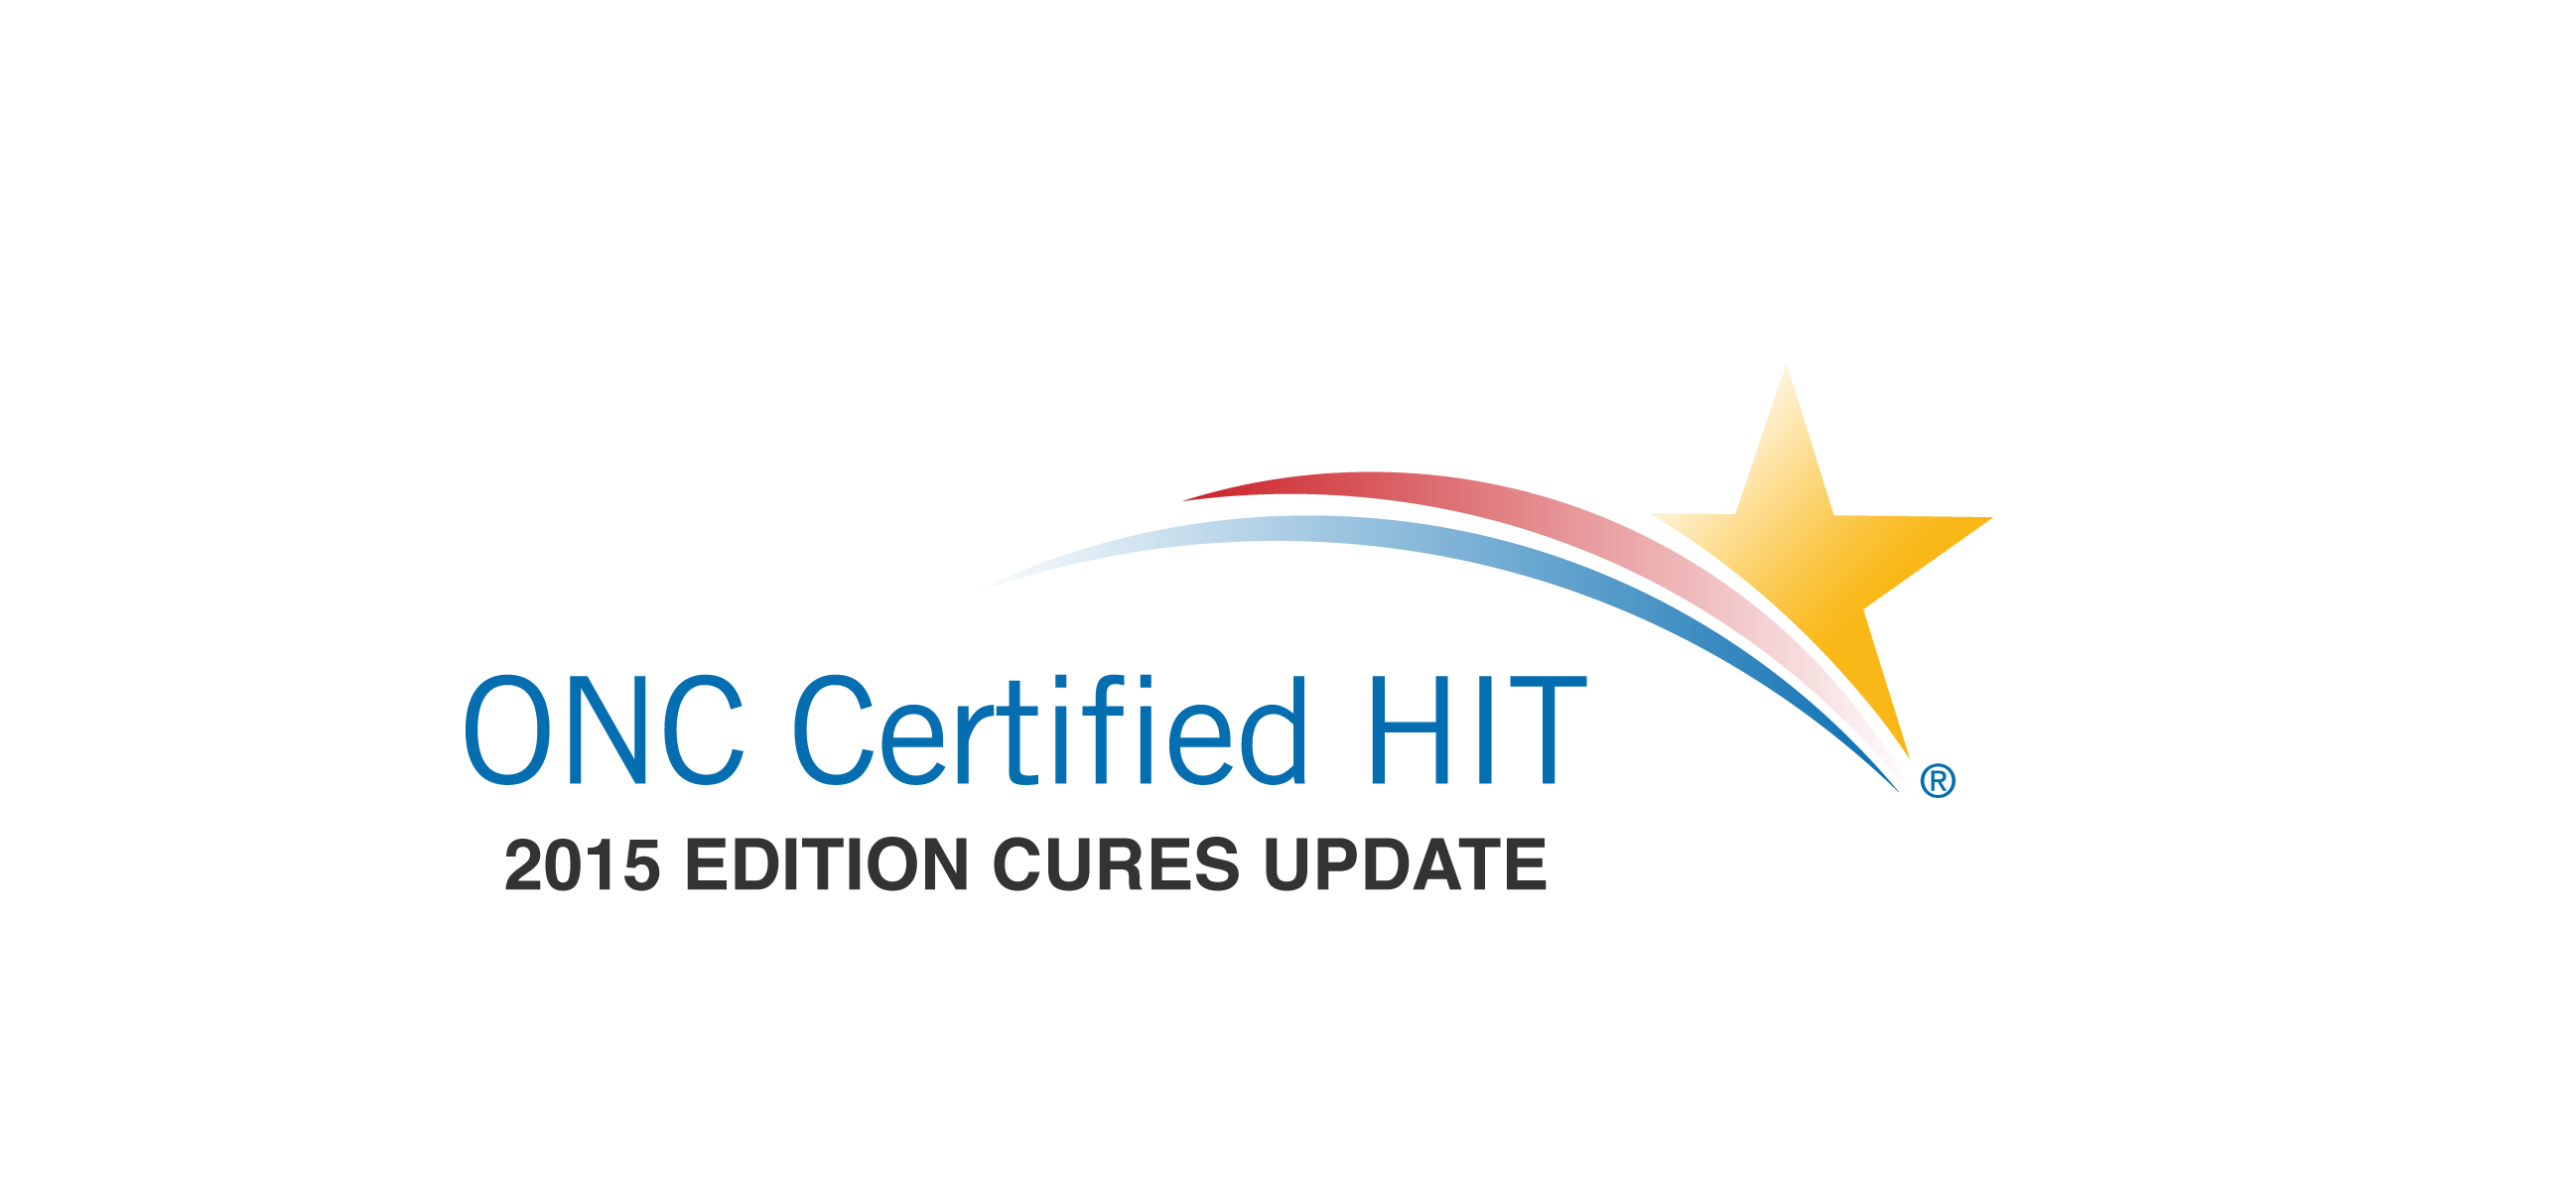 ONC_Certification_HIT_2015Edition_CU_Stacked_RGB